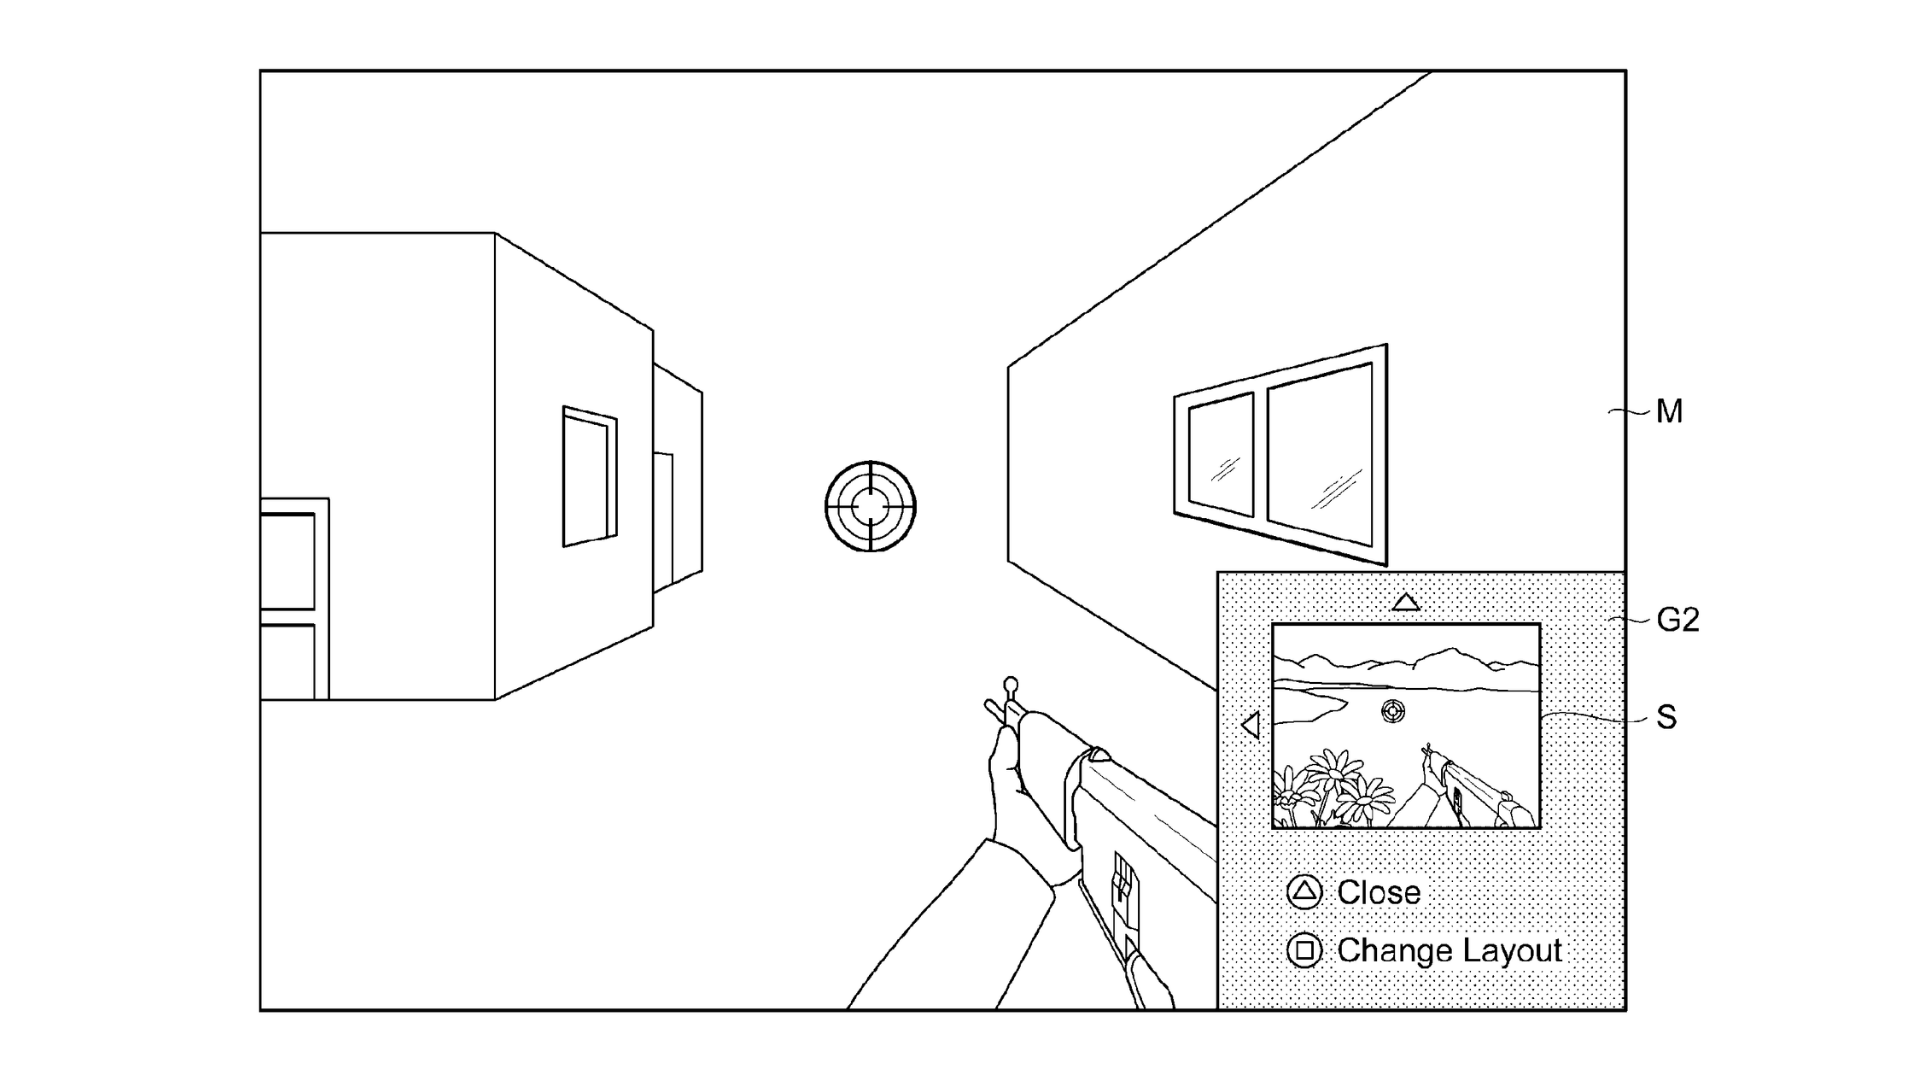 PS5: Sony's new patent providing convenience for PS5 games